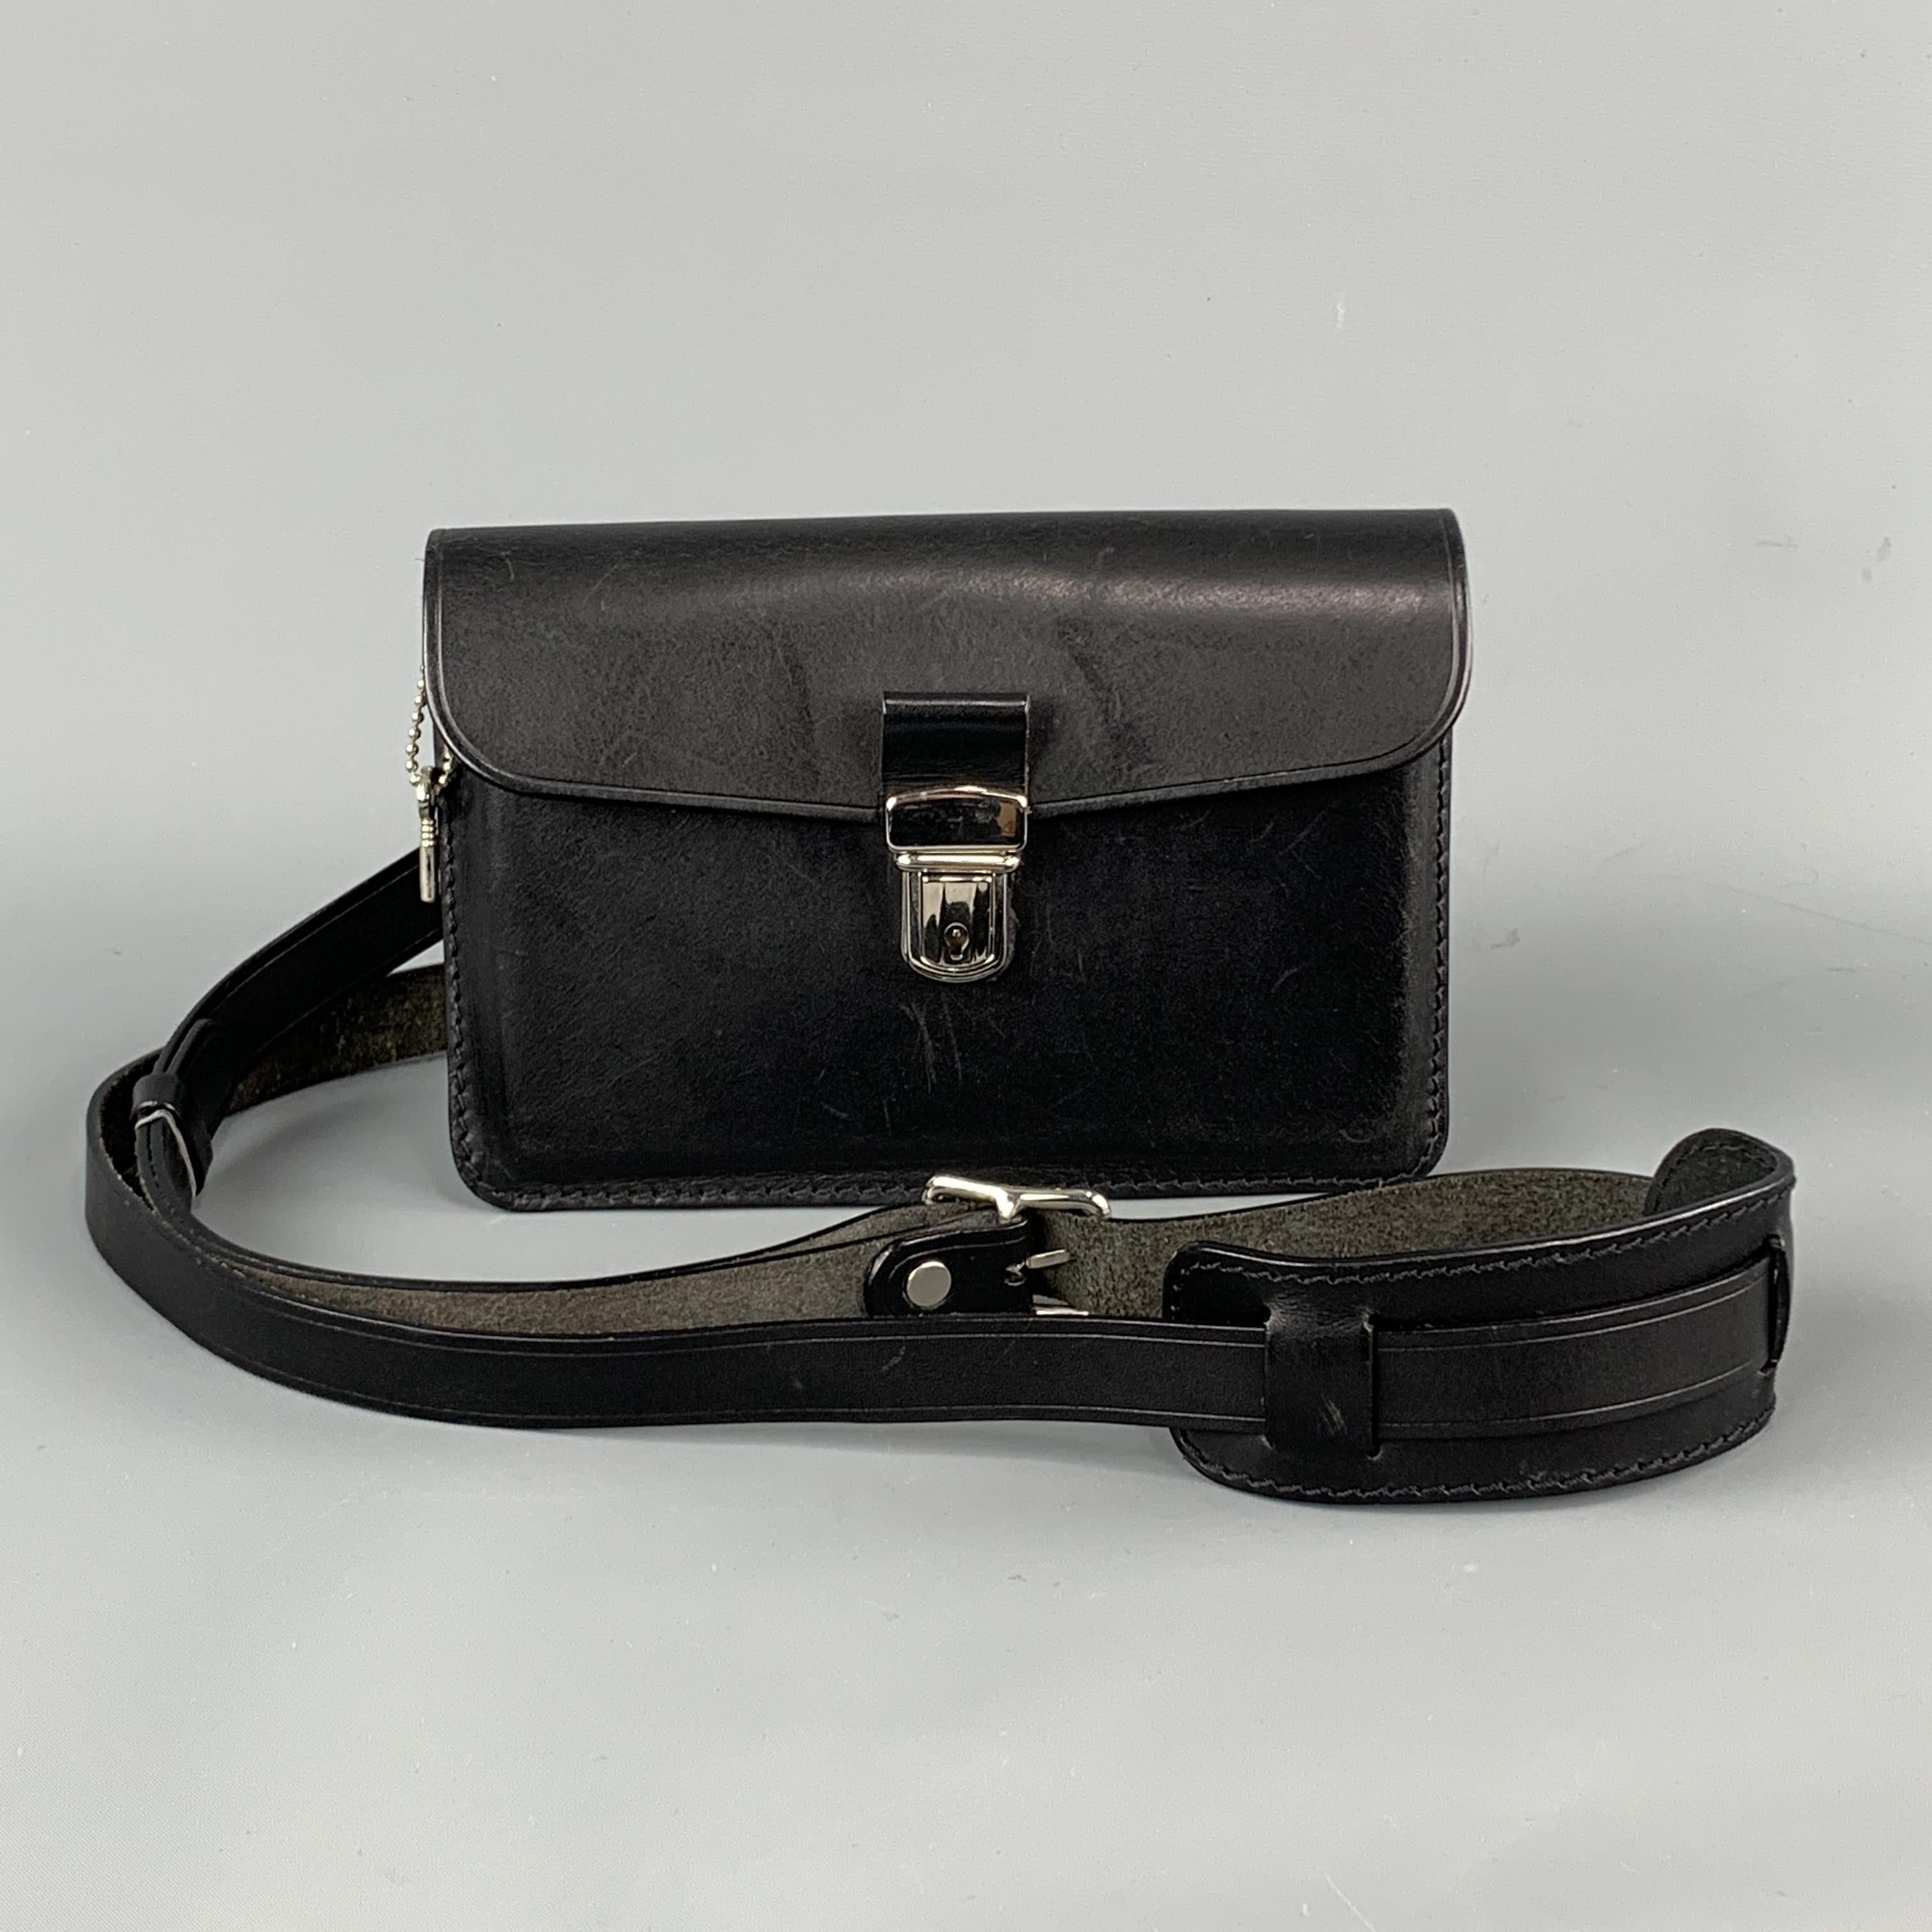 COMME des GARCONS mini satchel bag comes in structured black leather with a flap press lock closure, top zip, and back loops for belt attachment or detachable strap. Minor wear.
 
Very Good Pre-Owned Condition.
 
Measurements:
 
Length: 8 in.
Width: